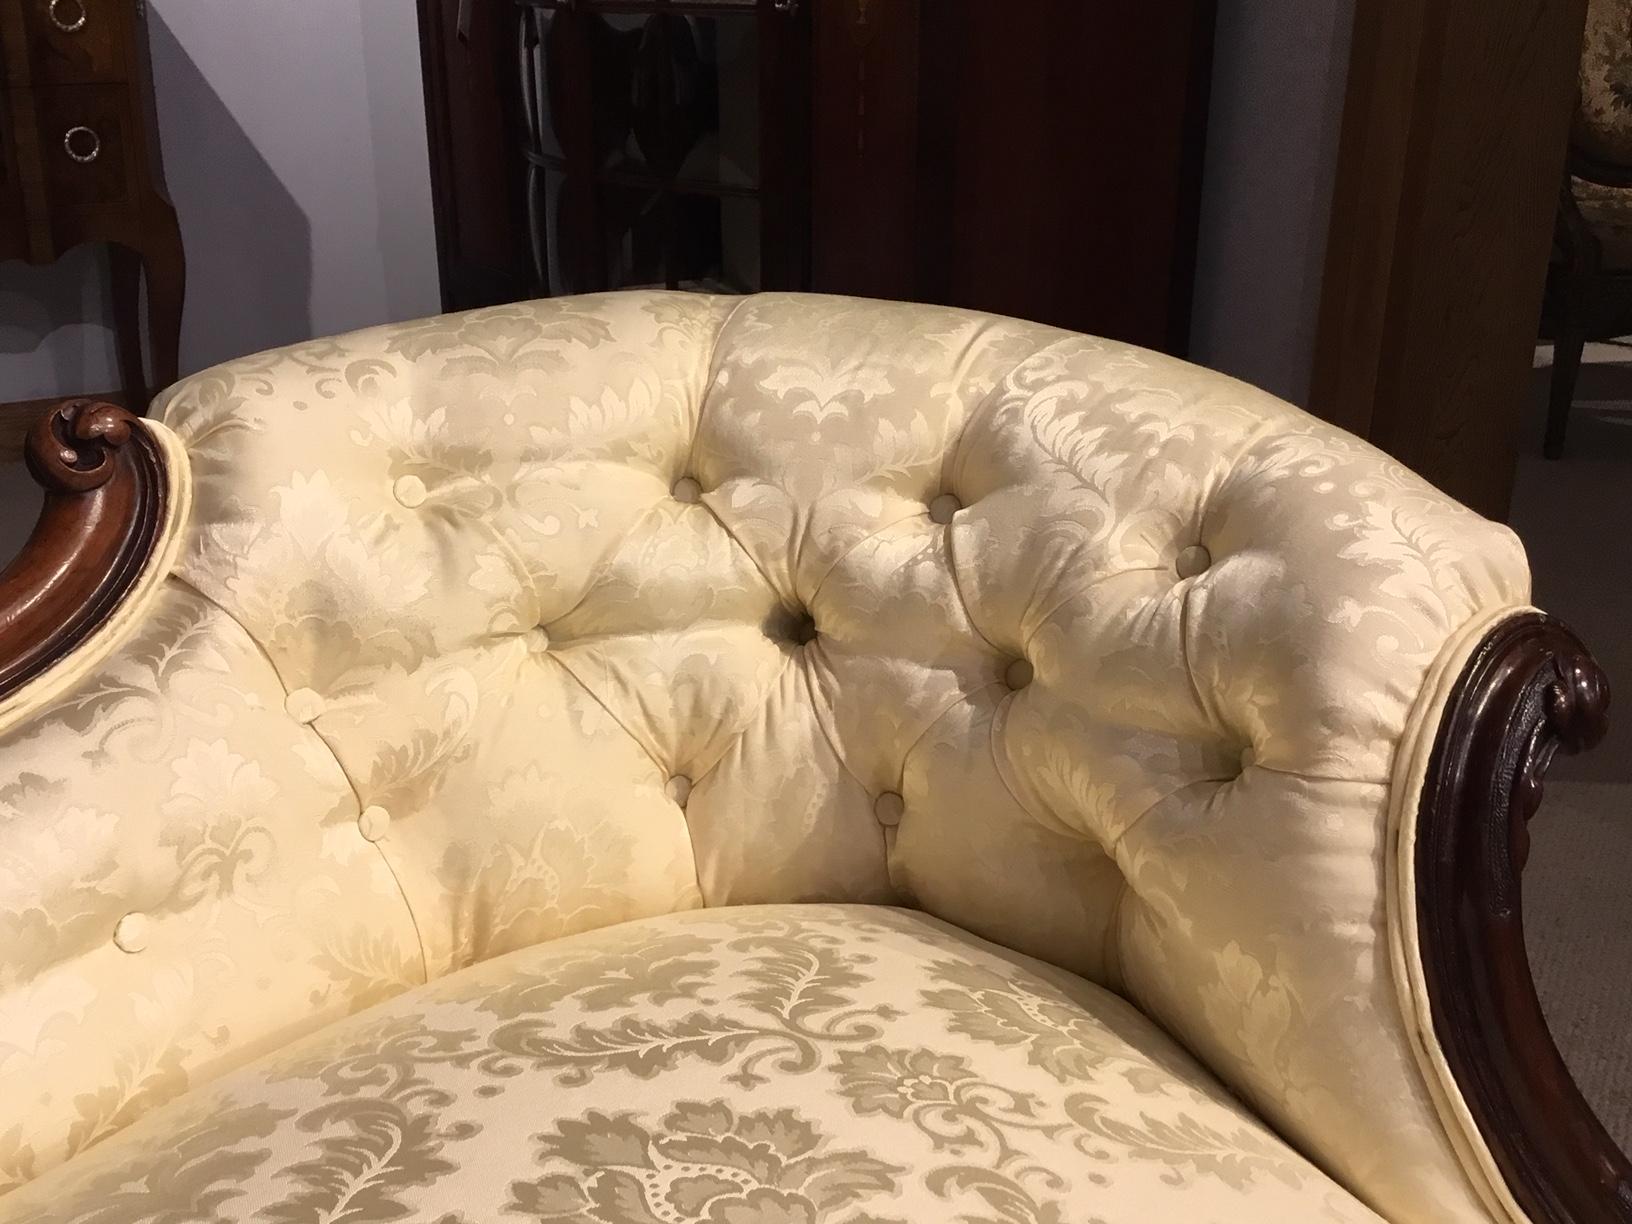 A fine quality walnut Victorian Period boudoir sofa. Having a shaped back with a central carved walnut show frame, deep buttoned curved ends and a sprung seat. The rolled arms having finely carved floral detail which is repeated on the curved seat